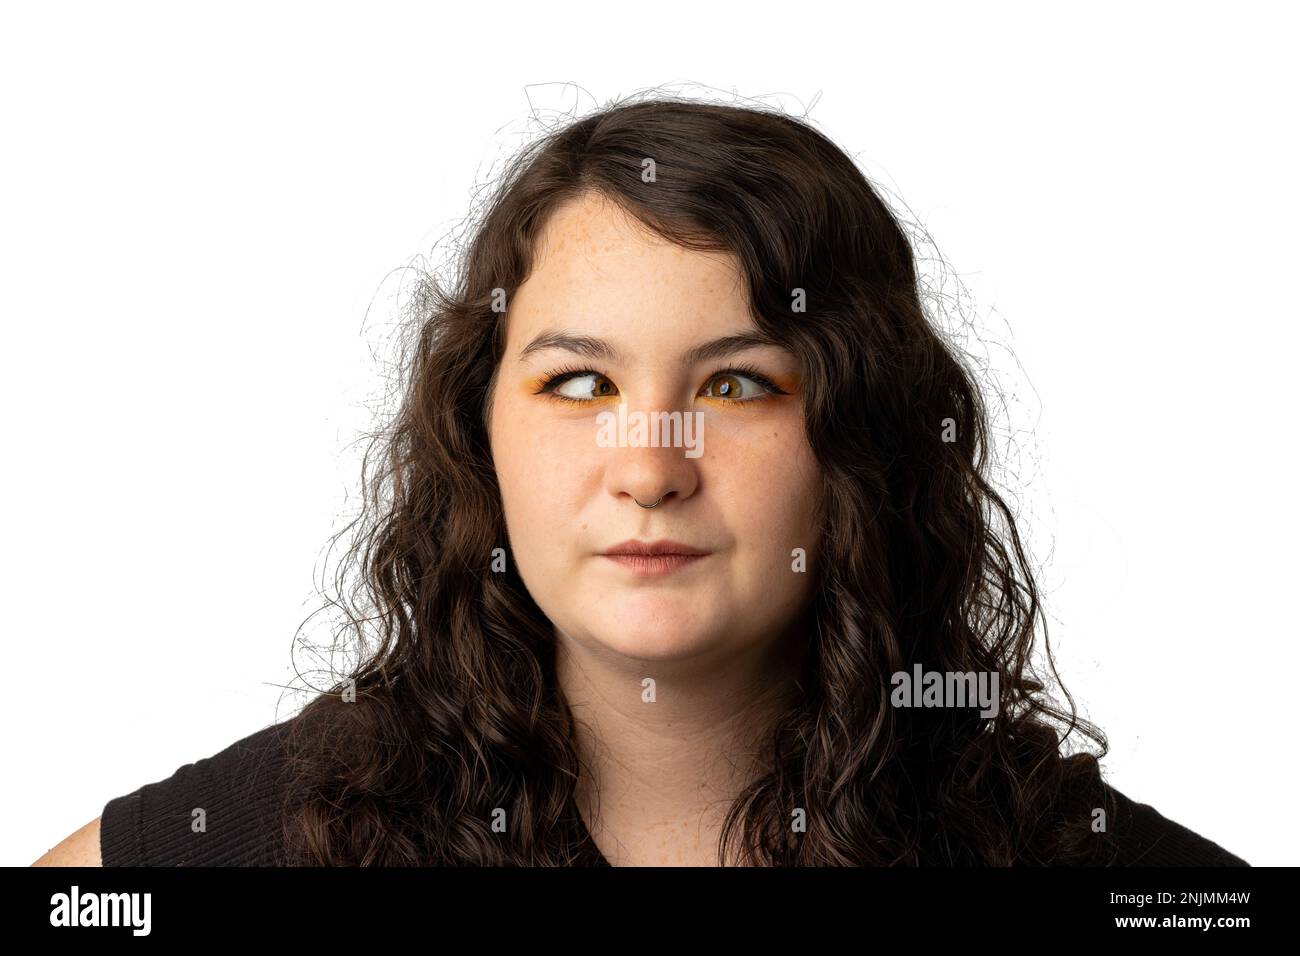 Young woman making a goofy face with crossed eyes Stock Photo